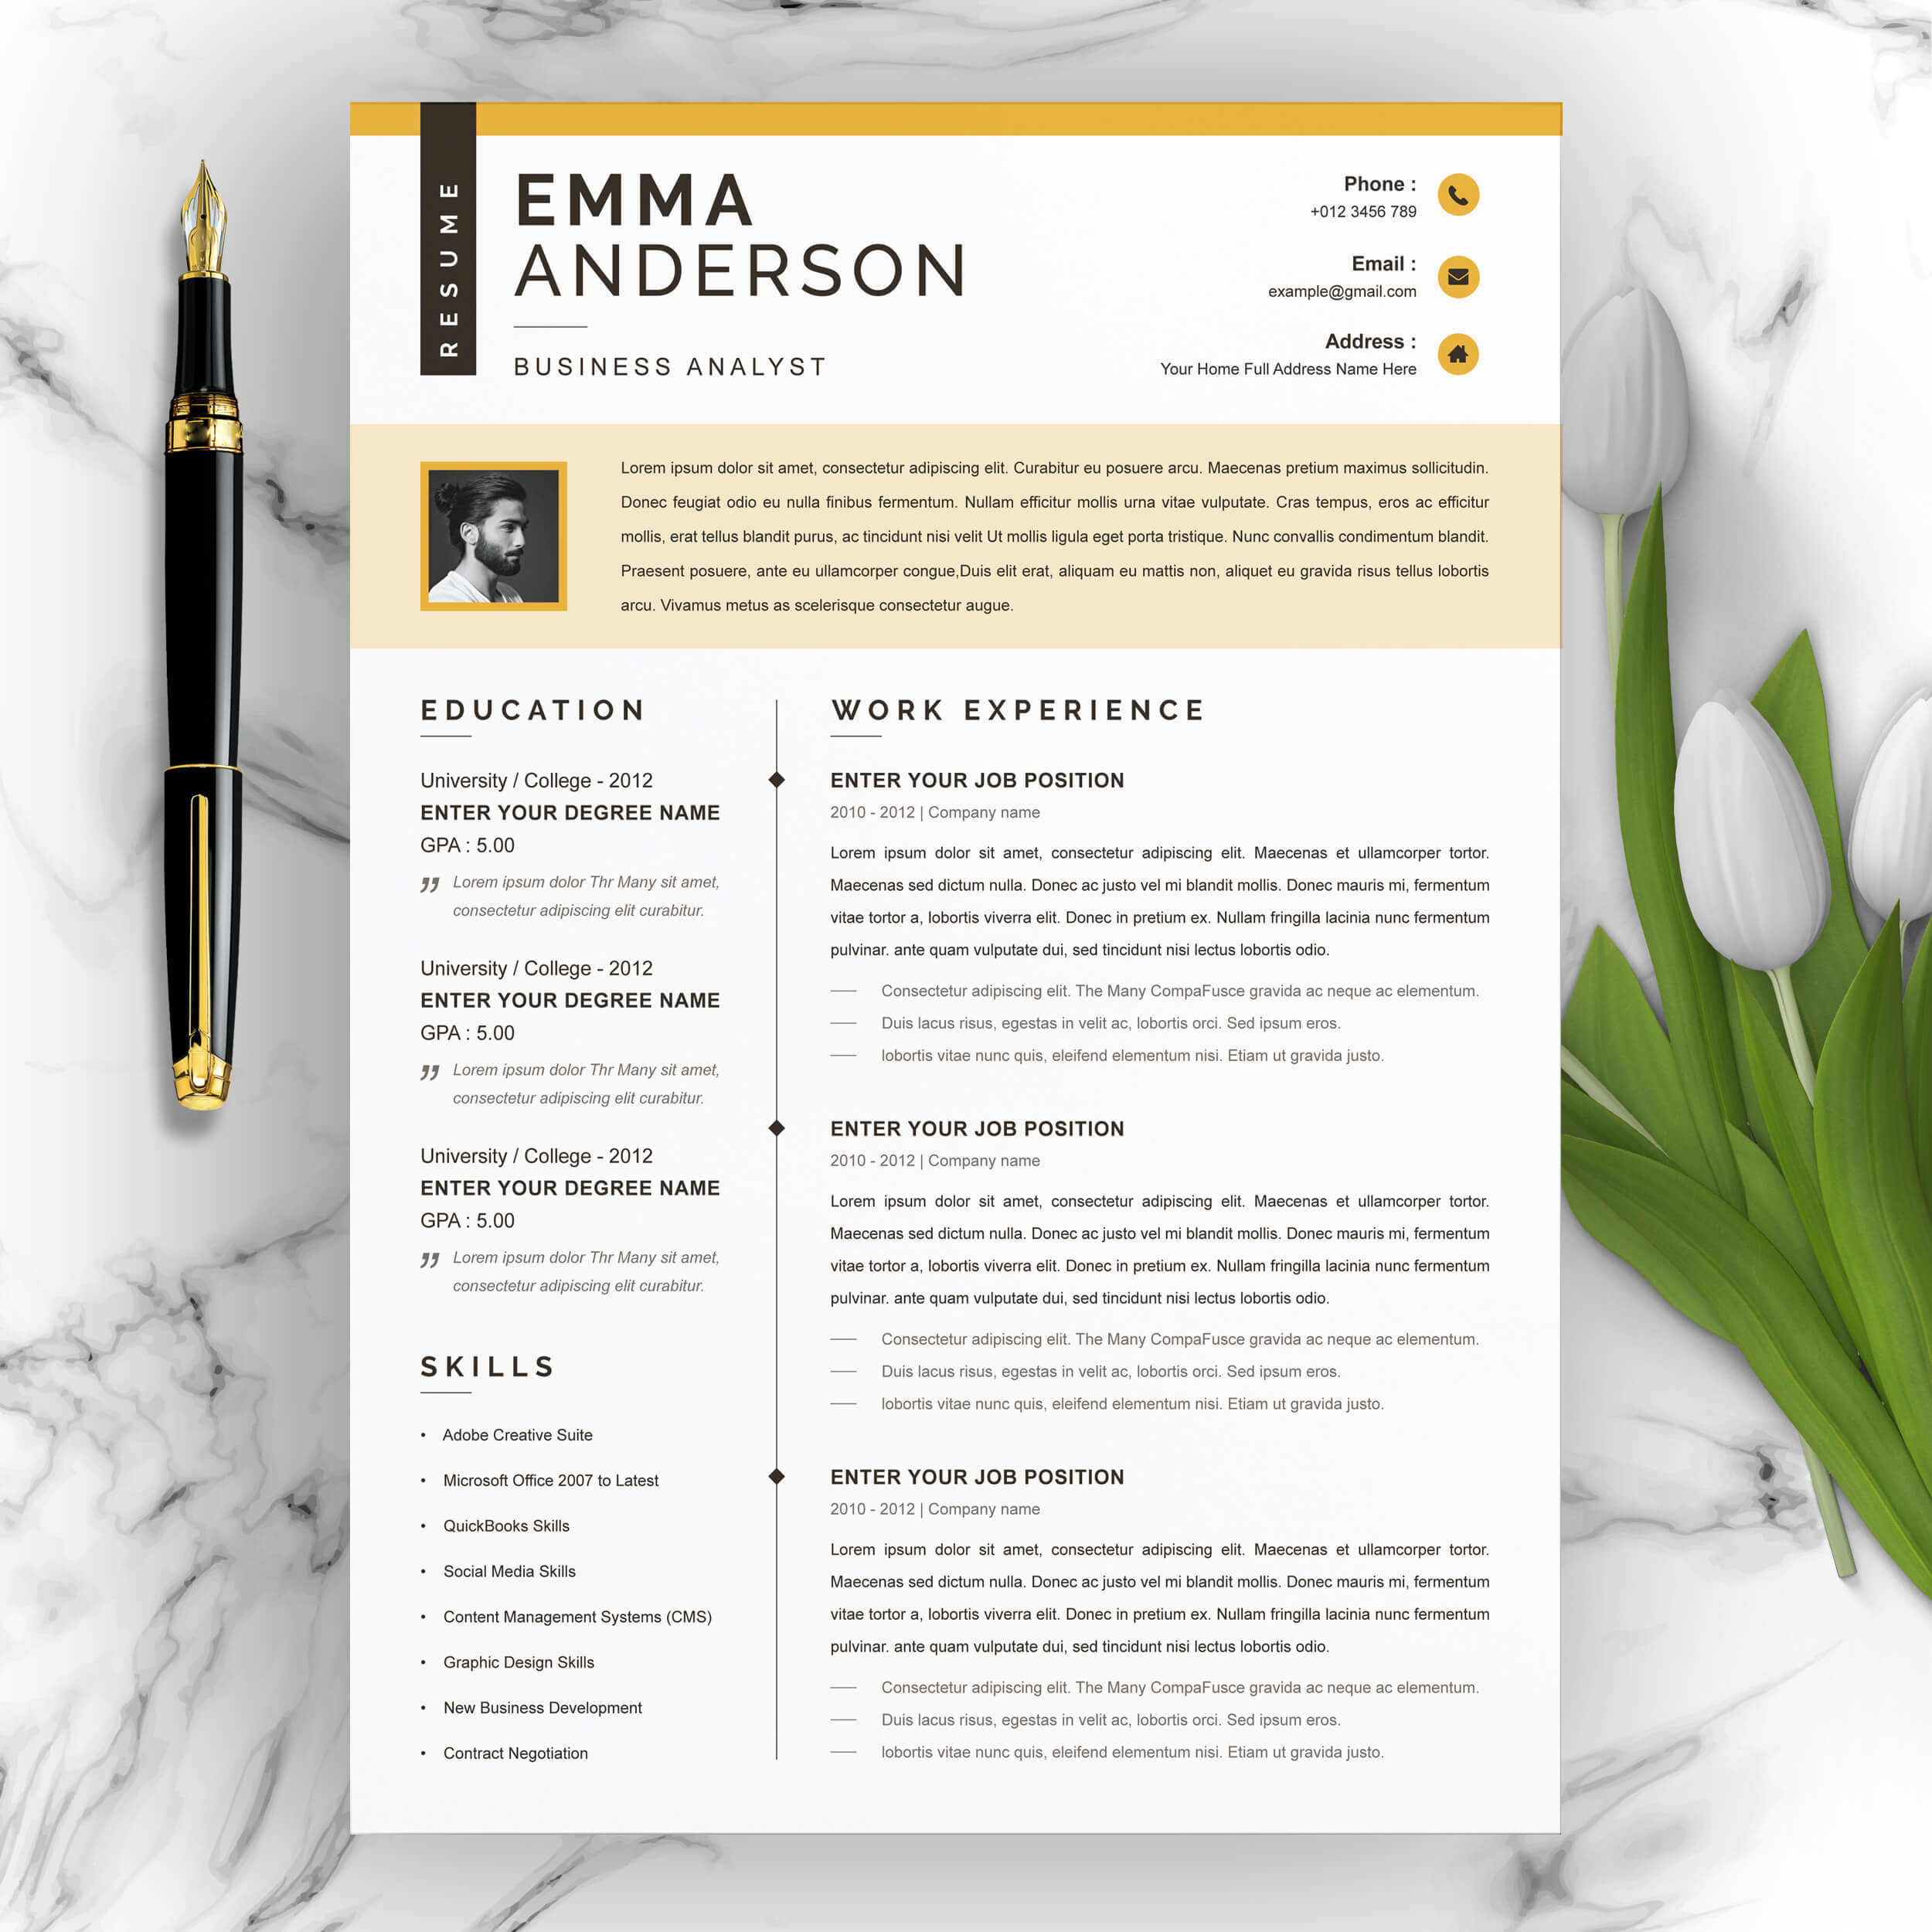 Business Analyst CV Template | Best Designer Resume Template cover image.